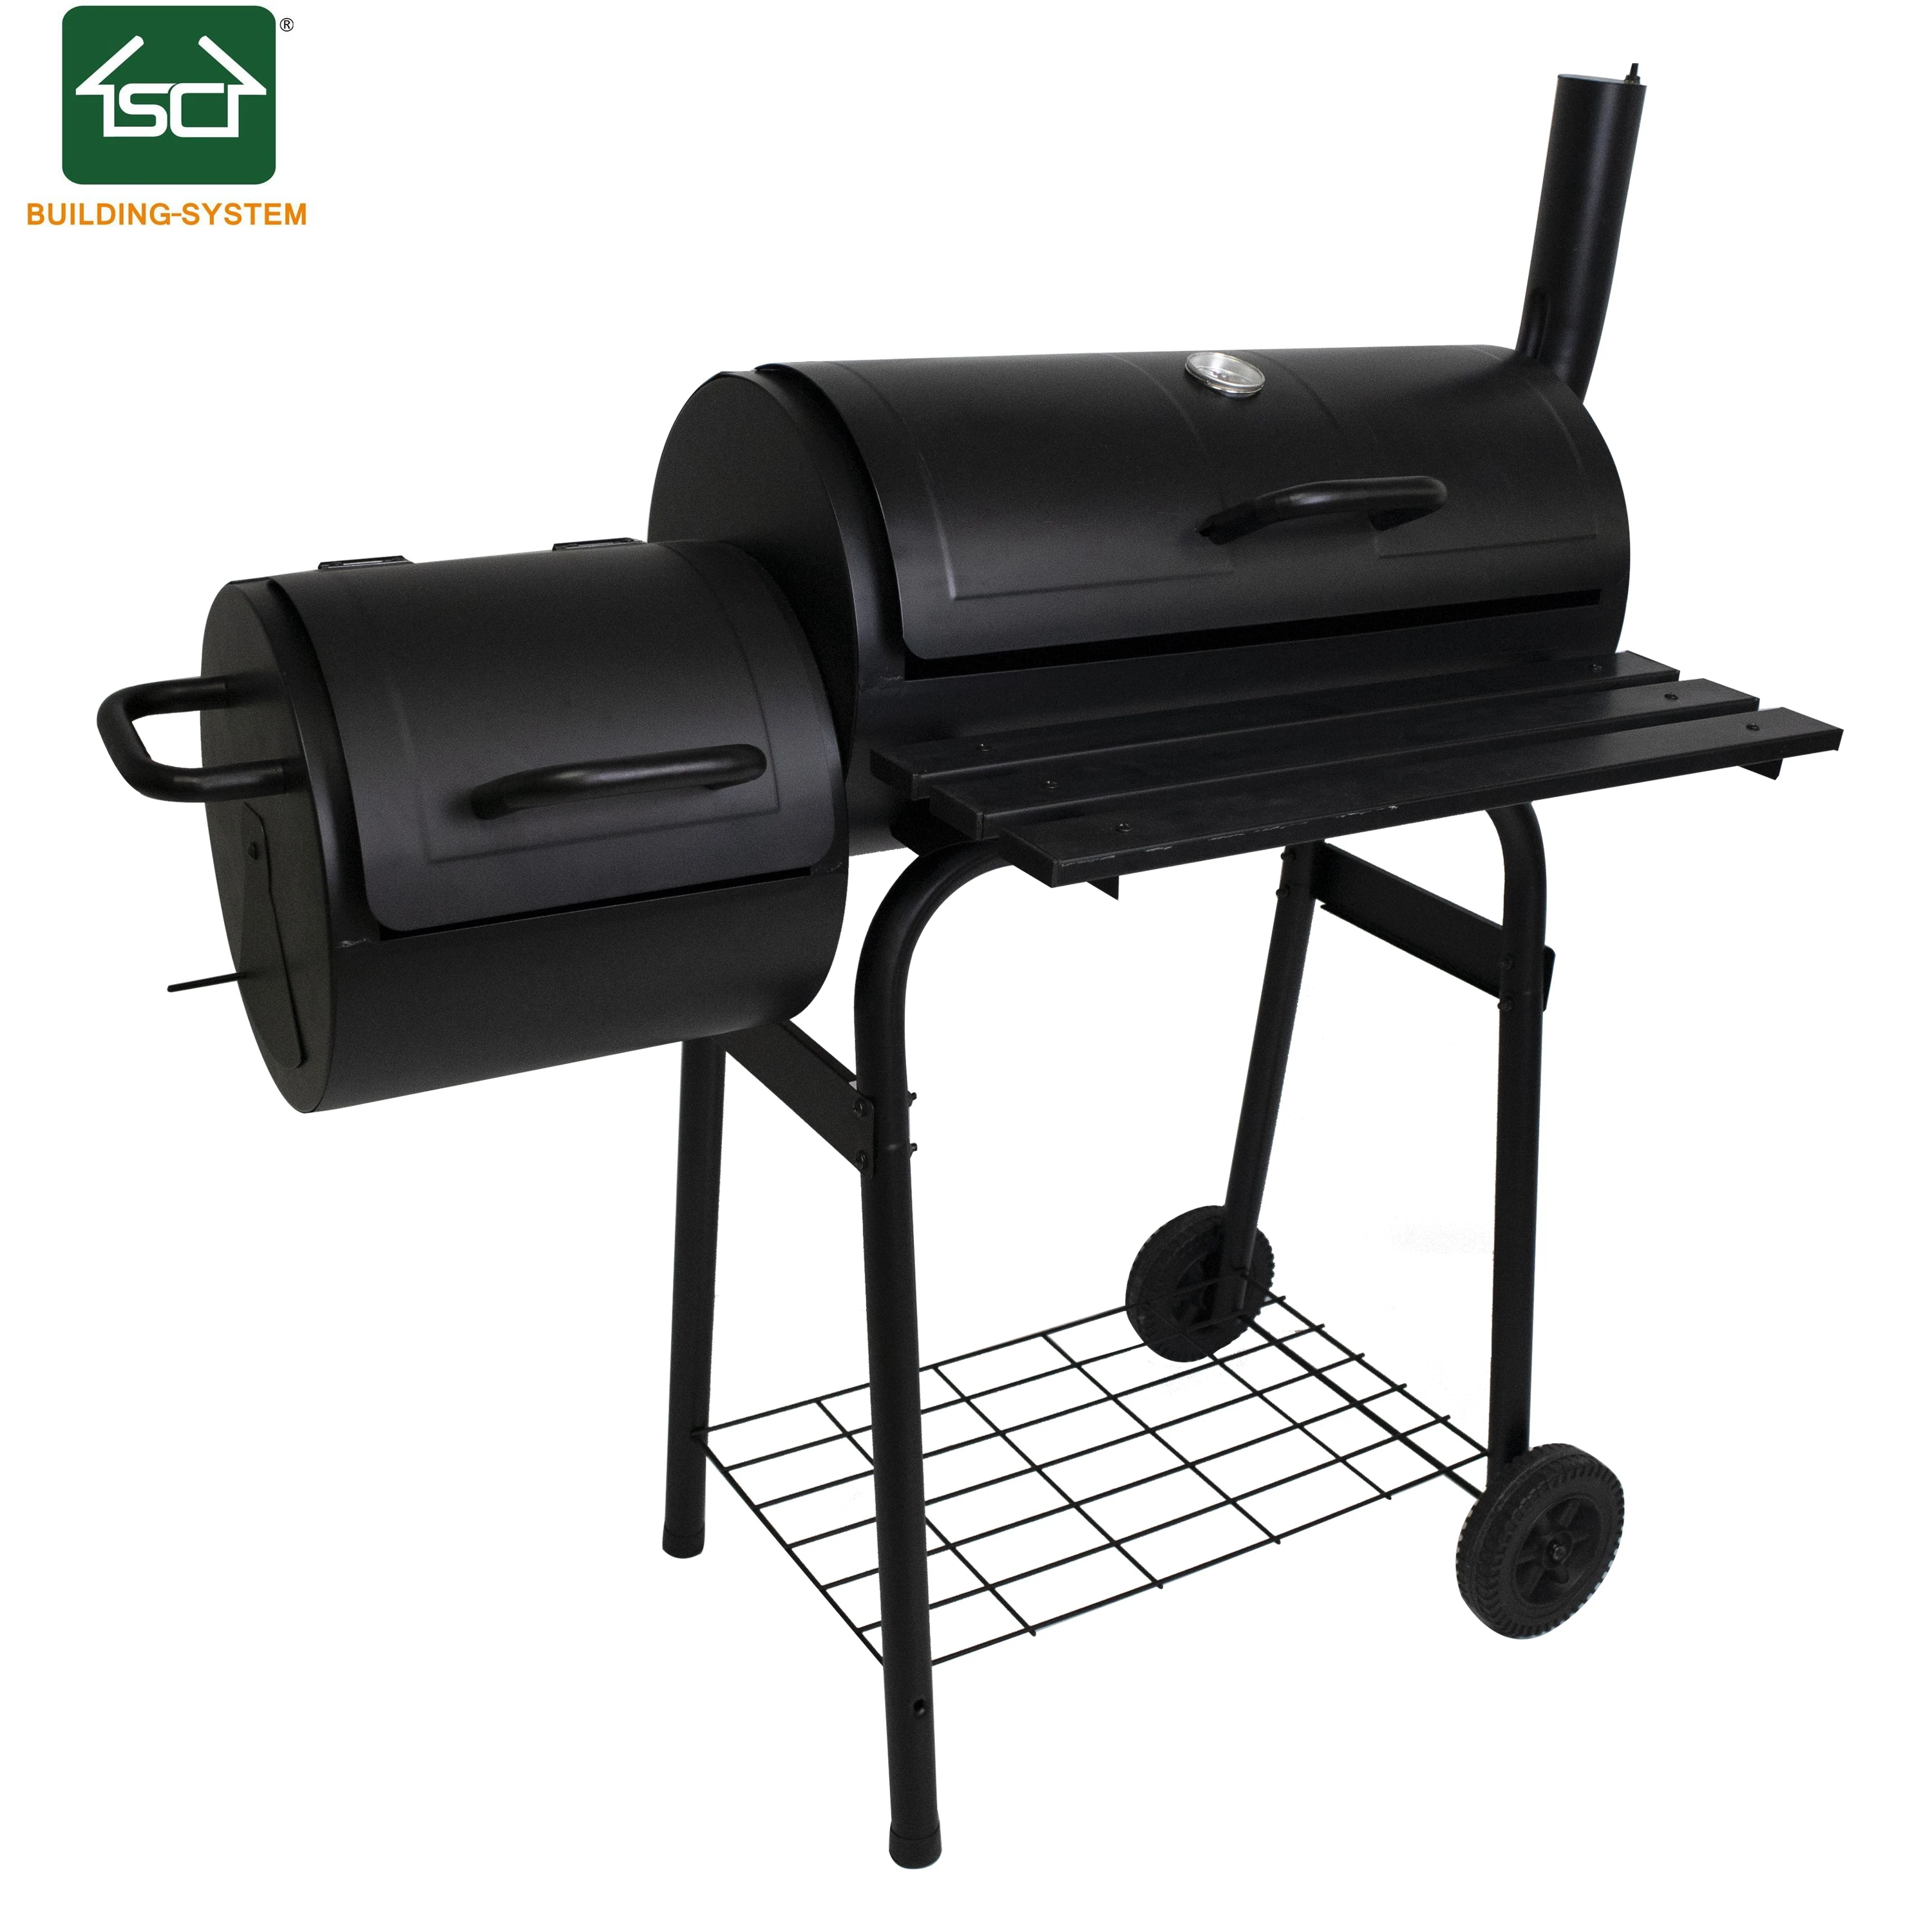 

Commercial BBQ Charcoal Grill with Offset Smoker Barbecue Trailer Vertical for Outdoor Cooking